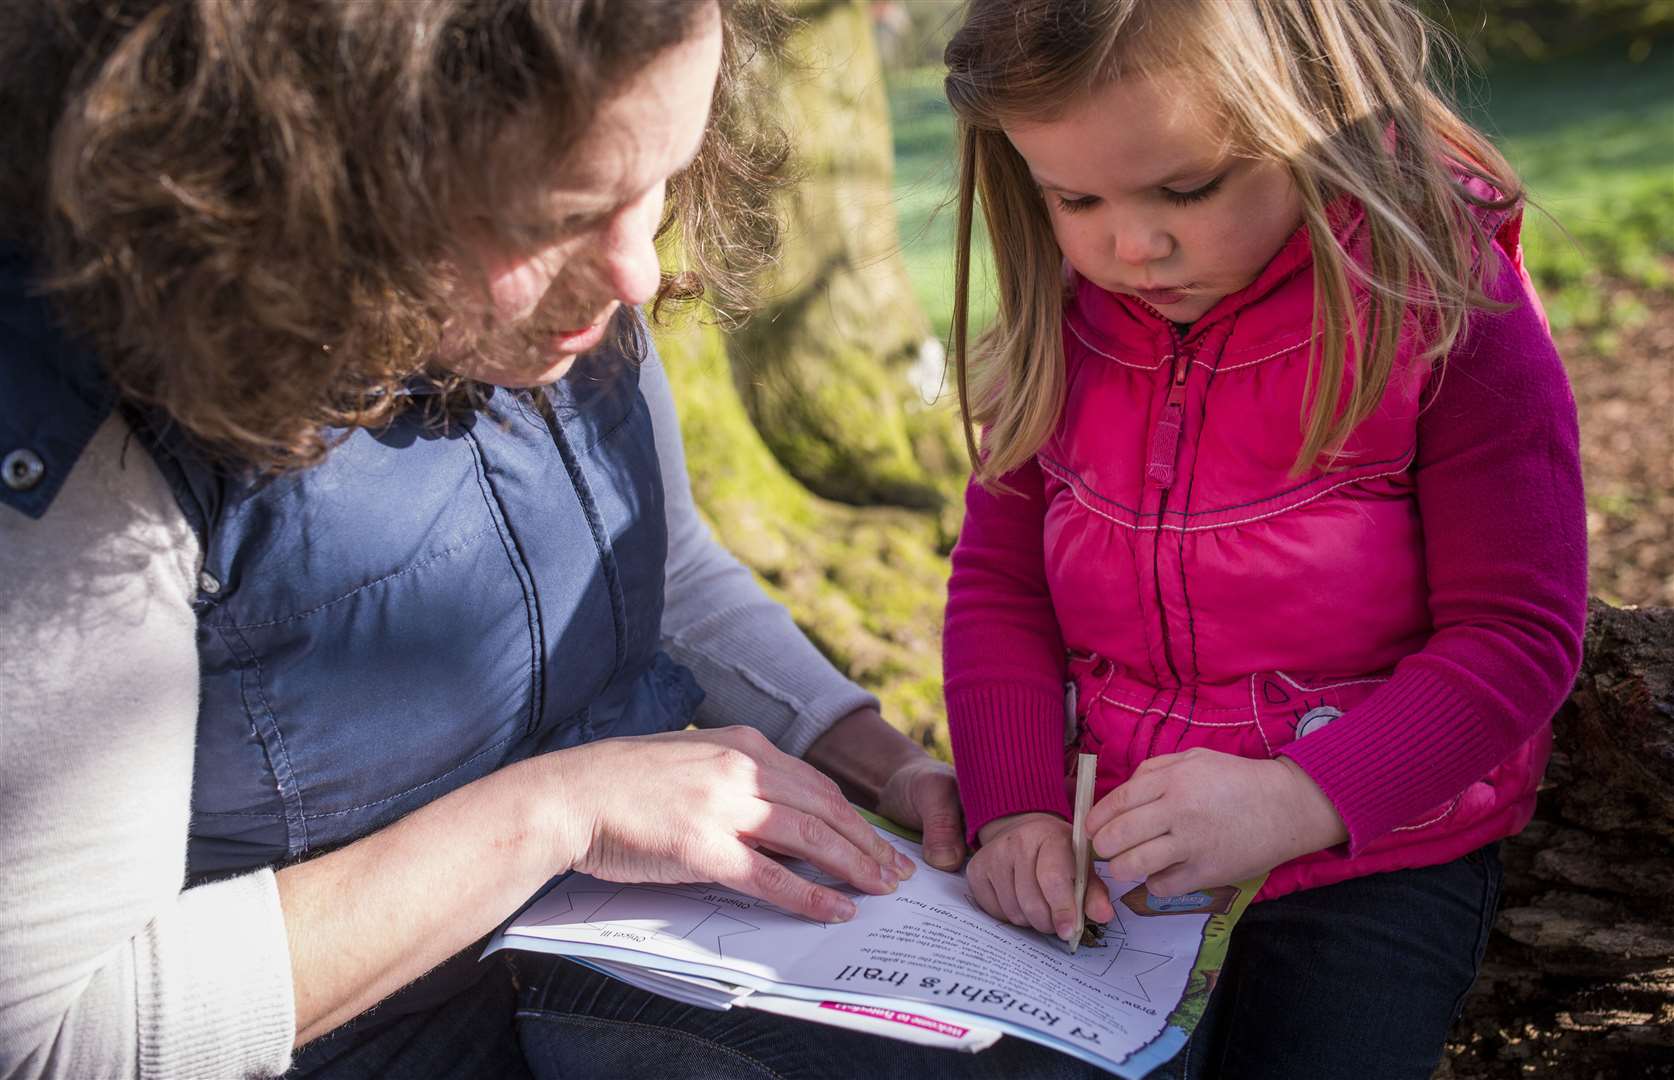 The National Trust hunts include trails and clues for children to complete